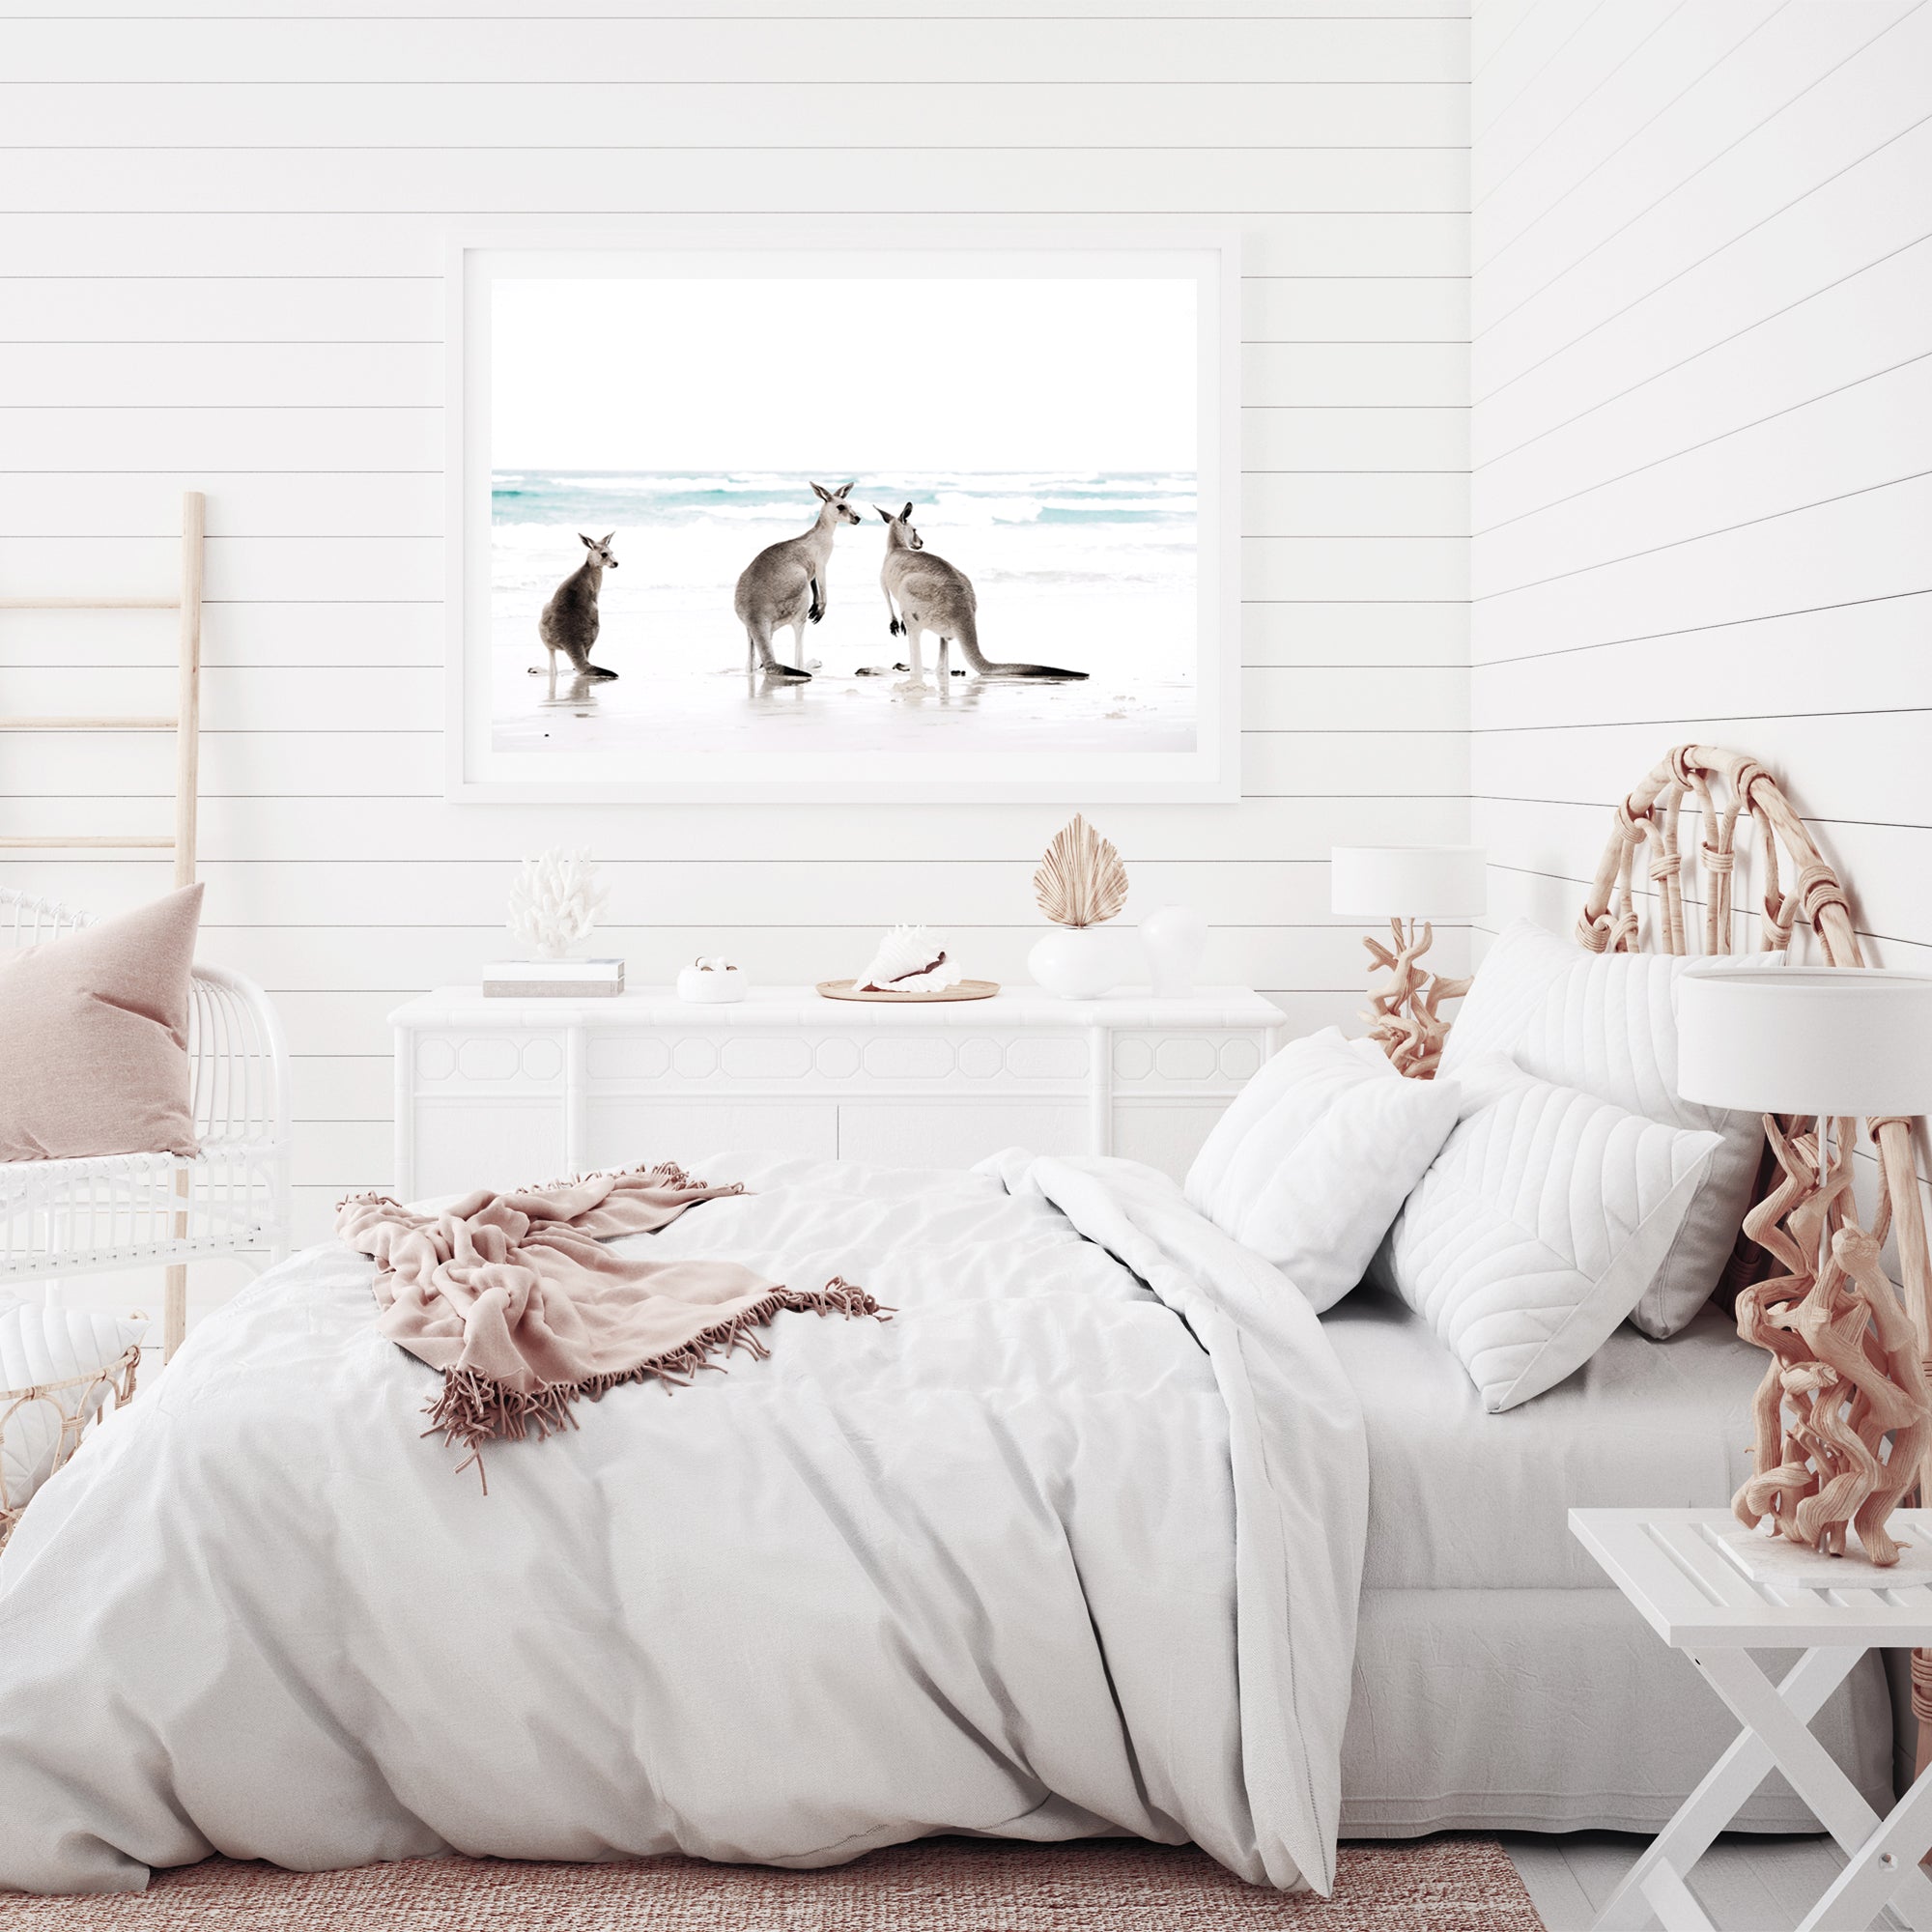 A framed or unframed coastal artwork of three kangaroos enjoying some time on the beach, available in natural timber, black or white frames.